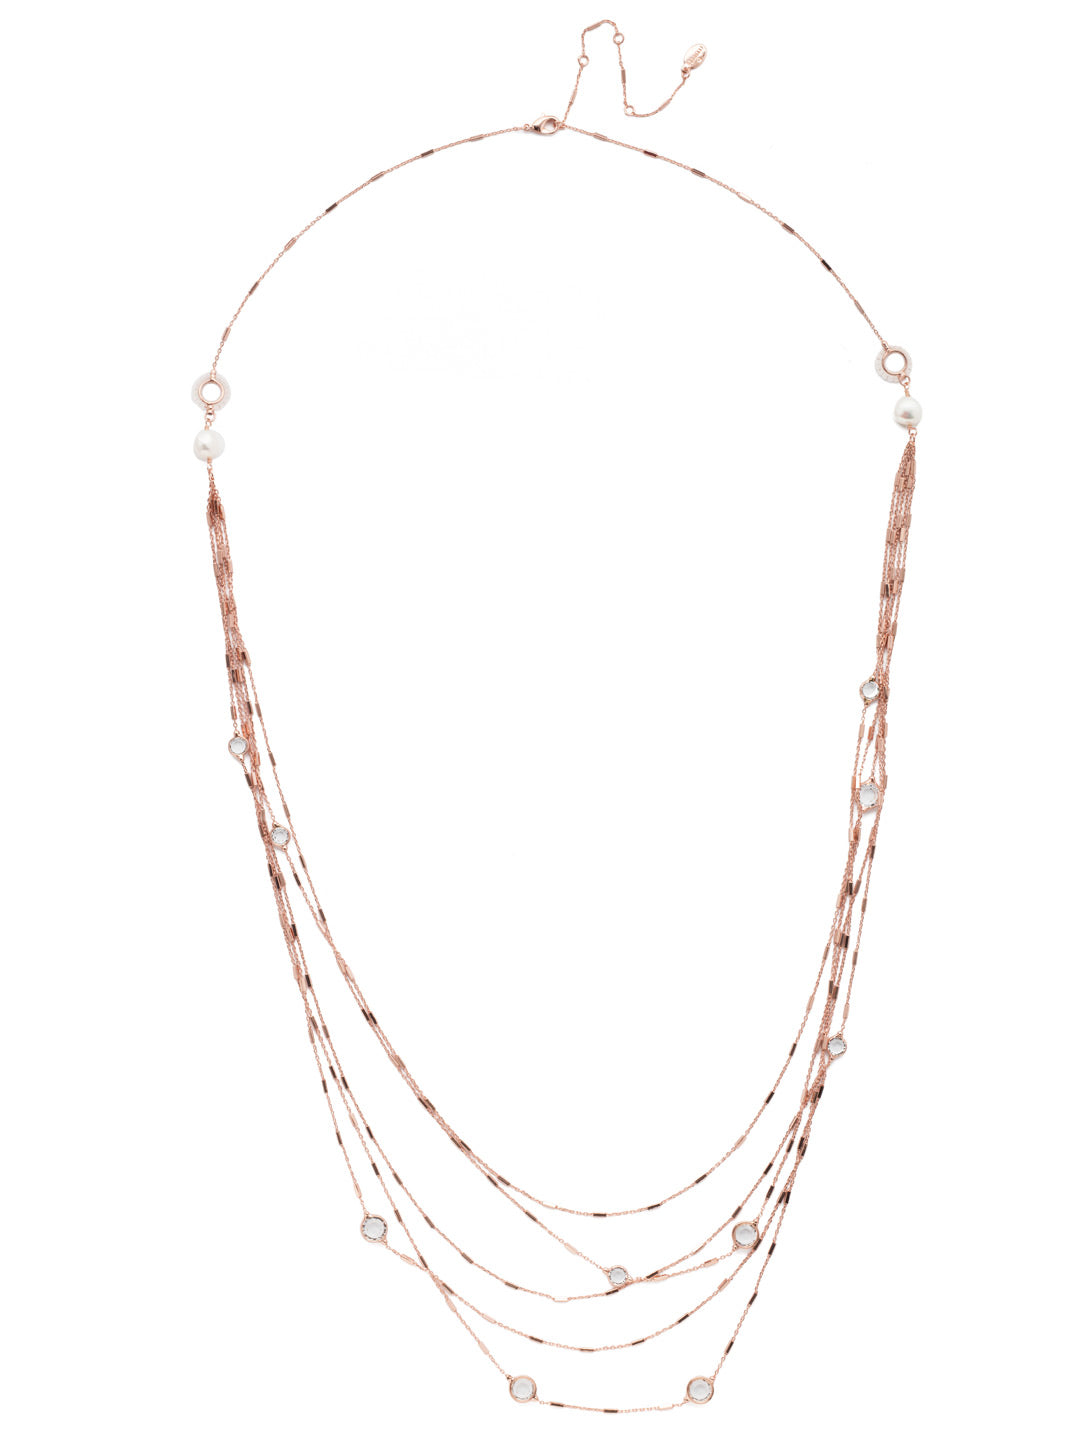 Luminous Layered Necklace - NEK2RGCRY - <p>Fasten on layers of filagree, sparkling crystals and freshwater pearl accents with this long strand necklace and you're set and ready to walk into any room as an accessorizing star. From Sorrelli's Crystal collection in our Rose Gold-tone finish.</p>